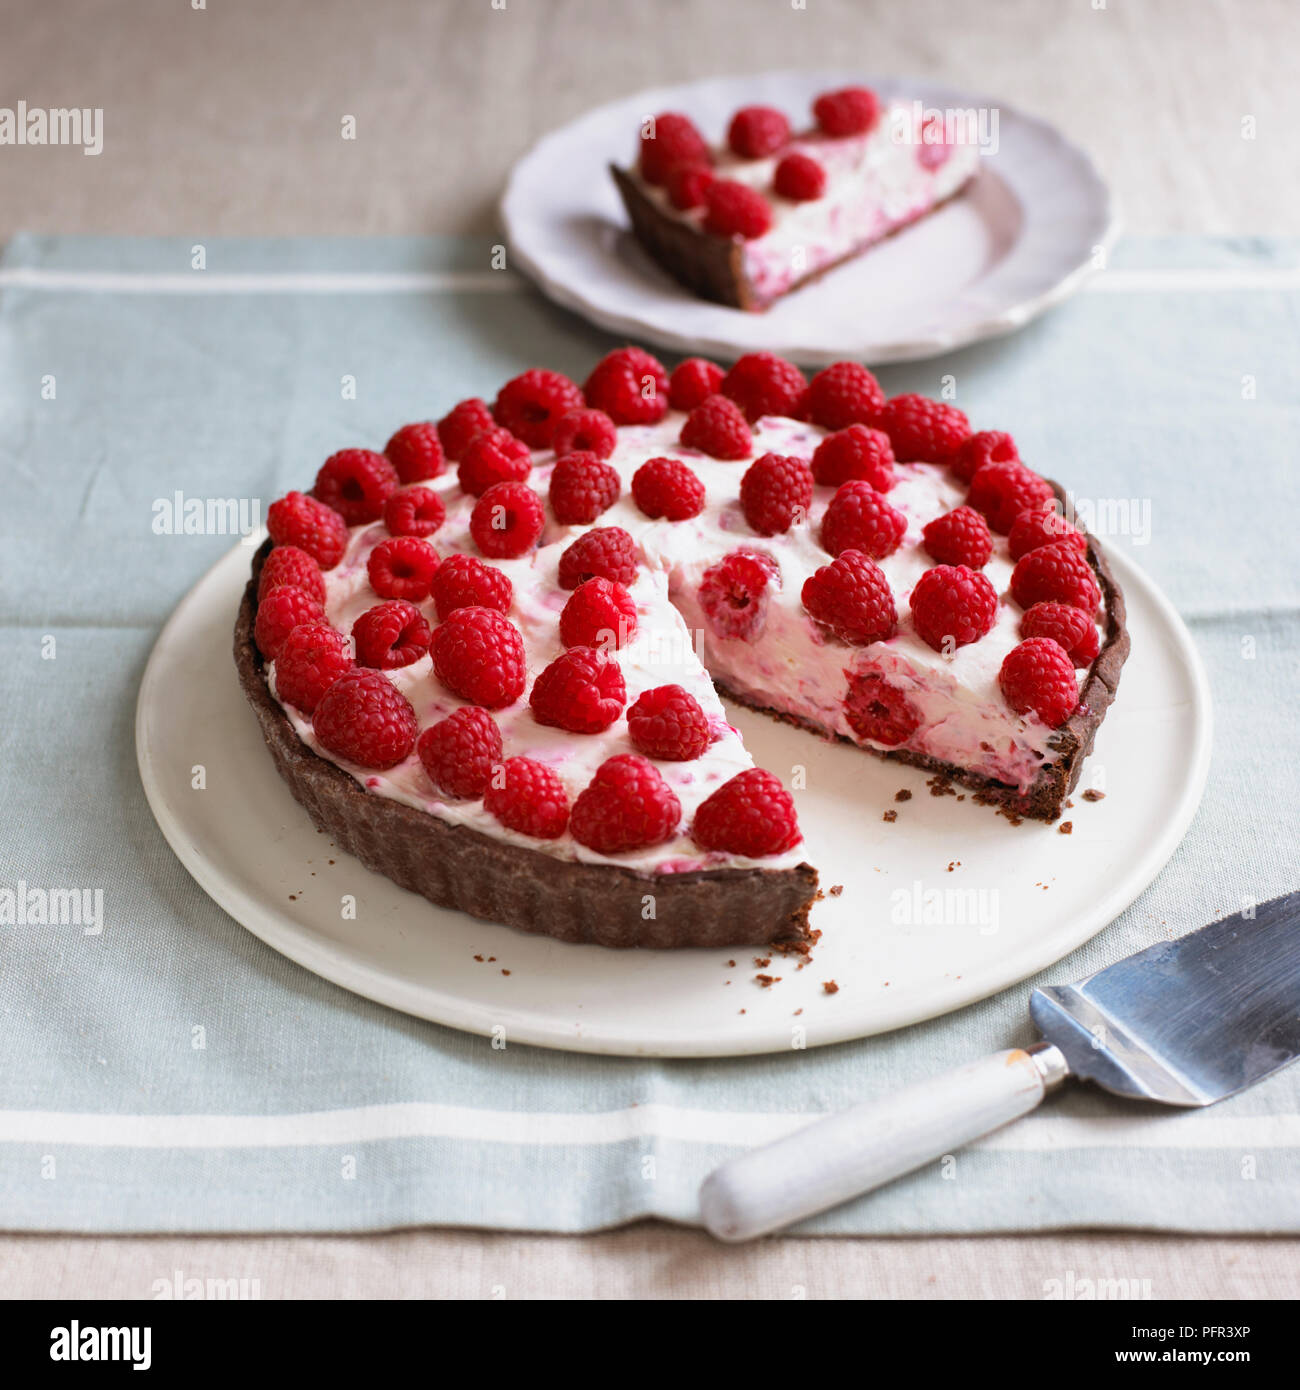 Double chocolate raspberry tart with single slice cut away, seen on plate in background Stock Photo